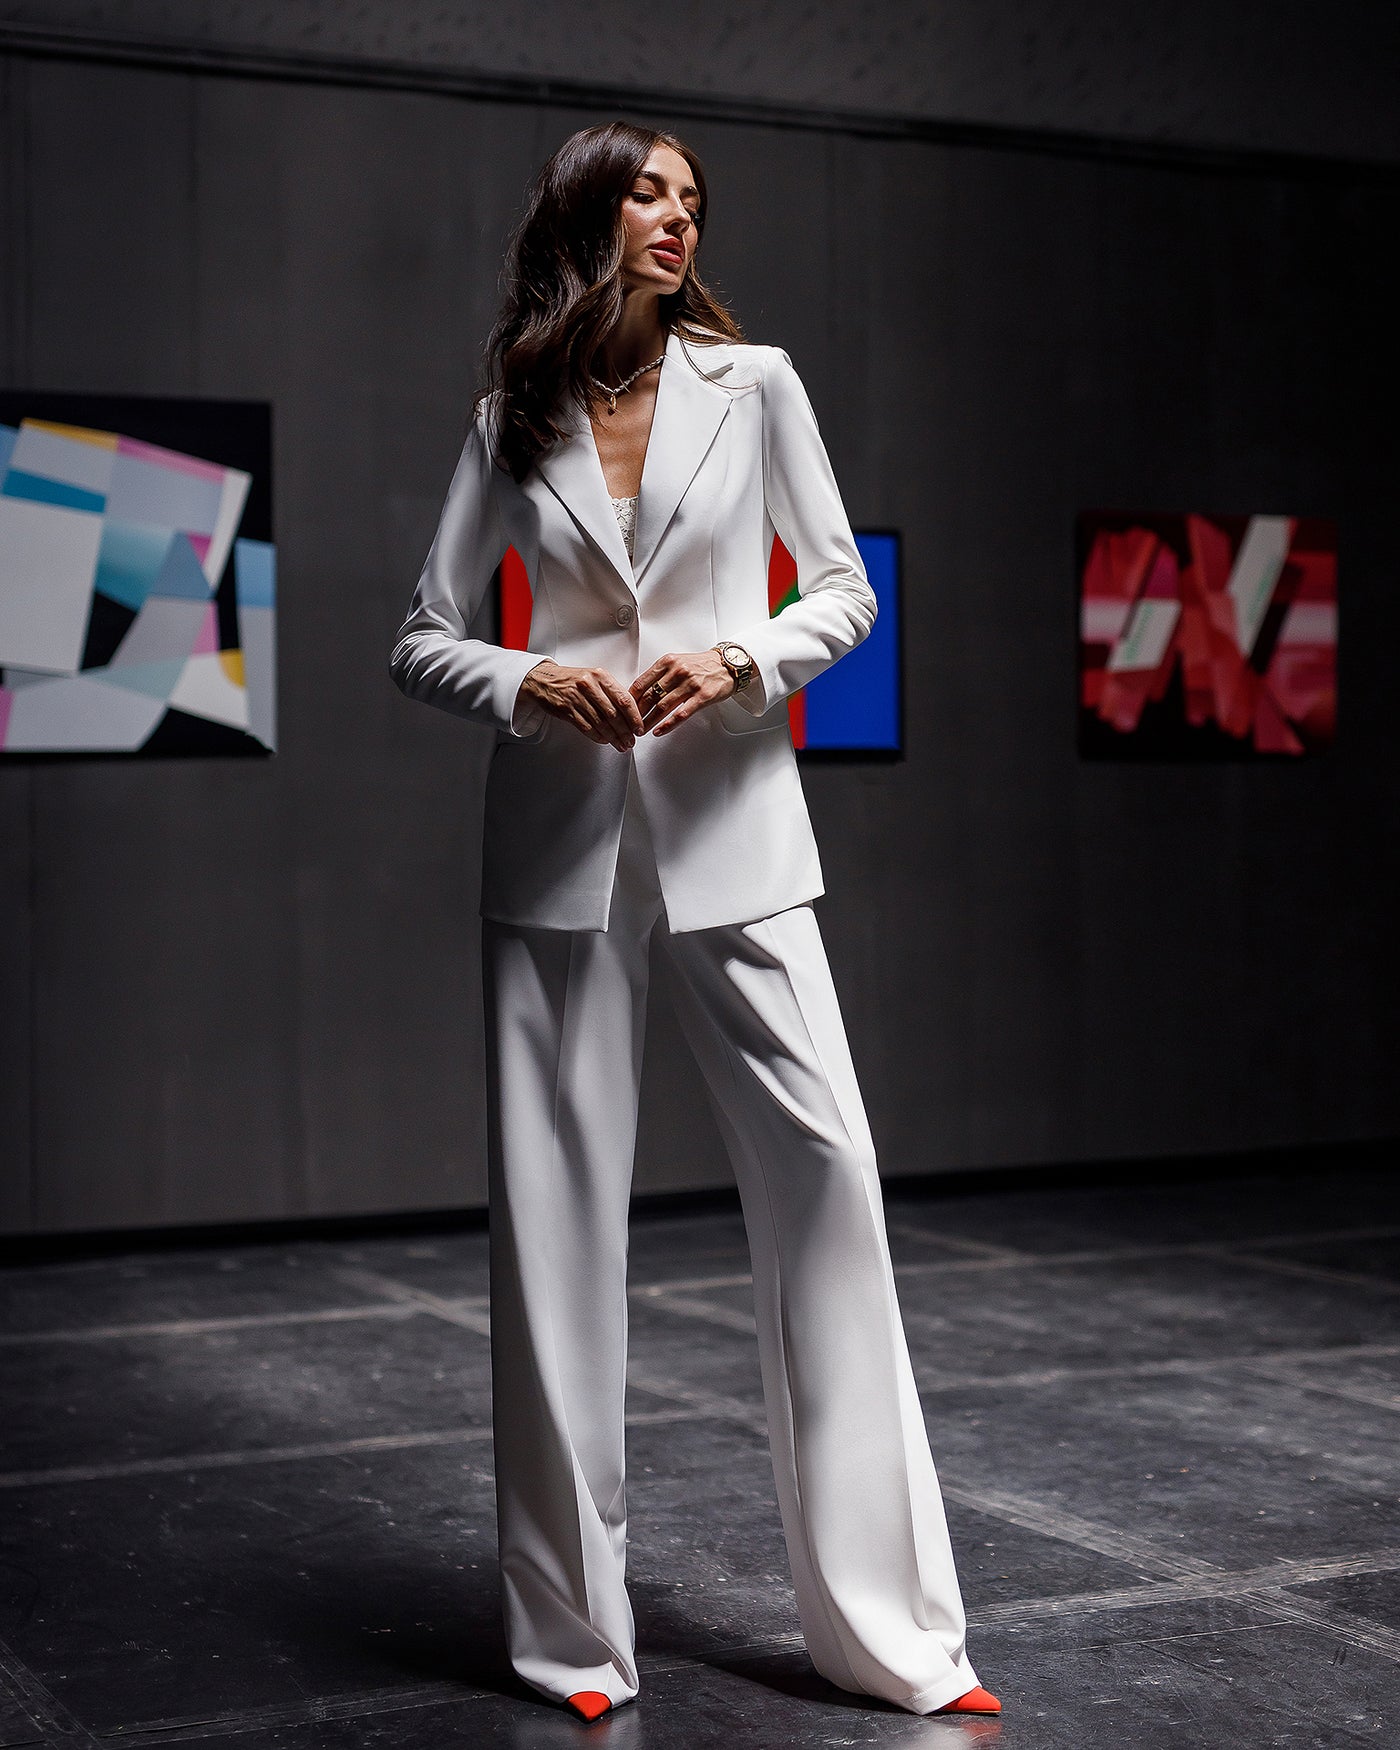 White Belted Wide-Leg Suit 2-Piece (article 030)